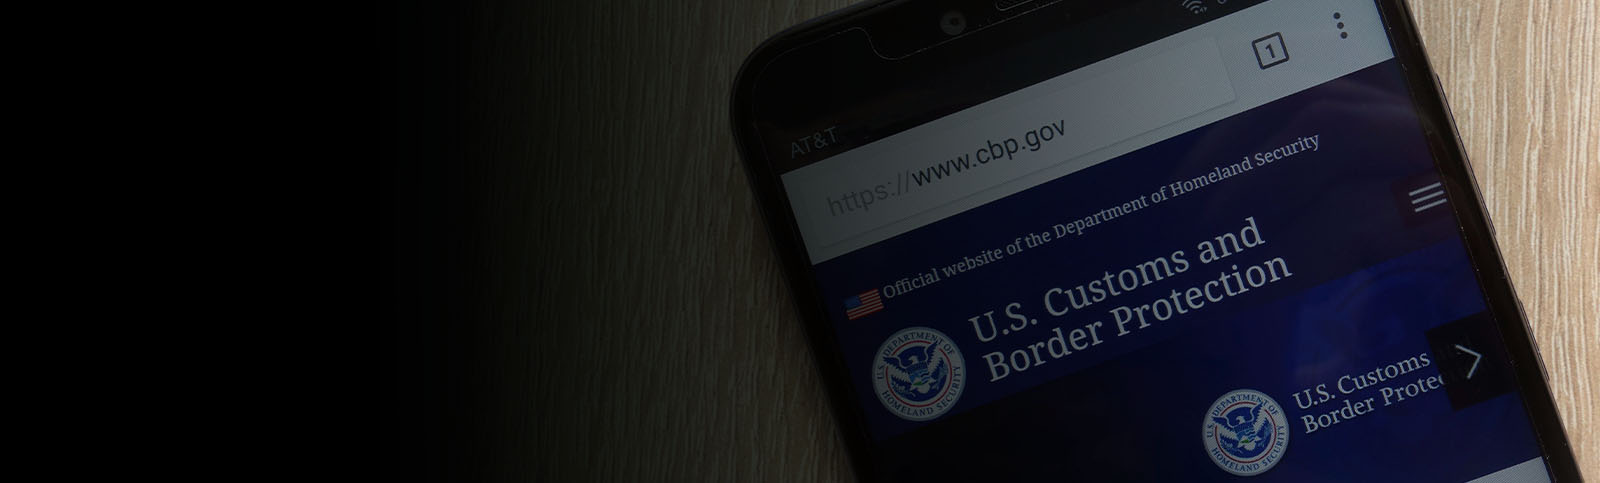 U.S. Customs and Border Protection website displayed on a modern smartphone.